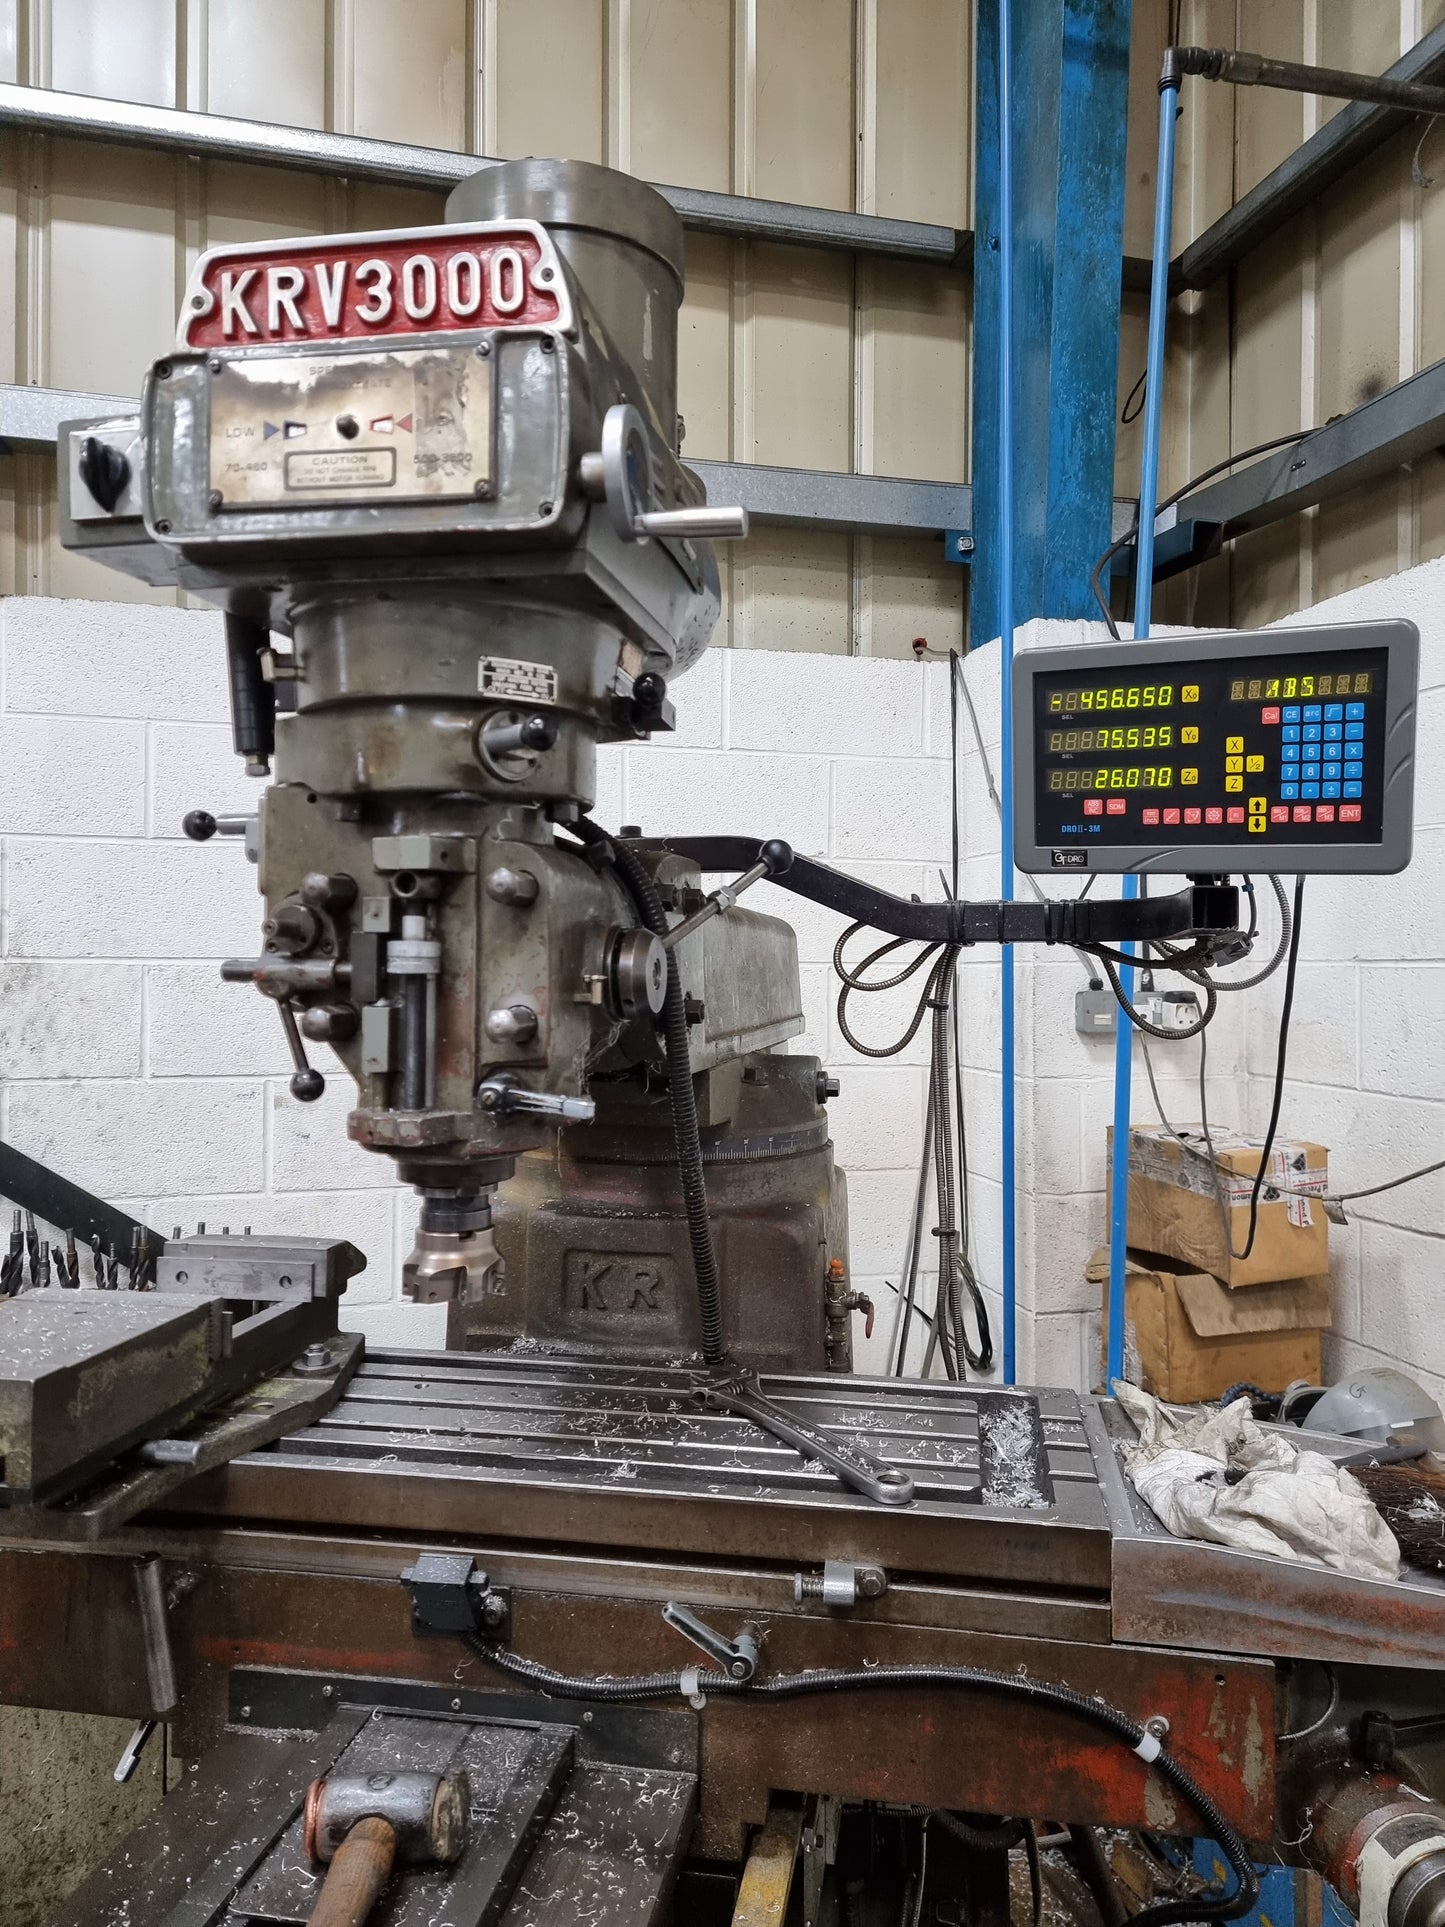 KRV-3000-Turret-milling-machine-with-DRO